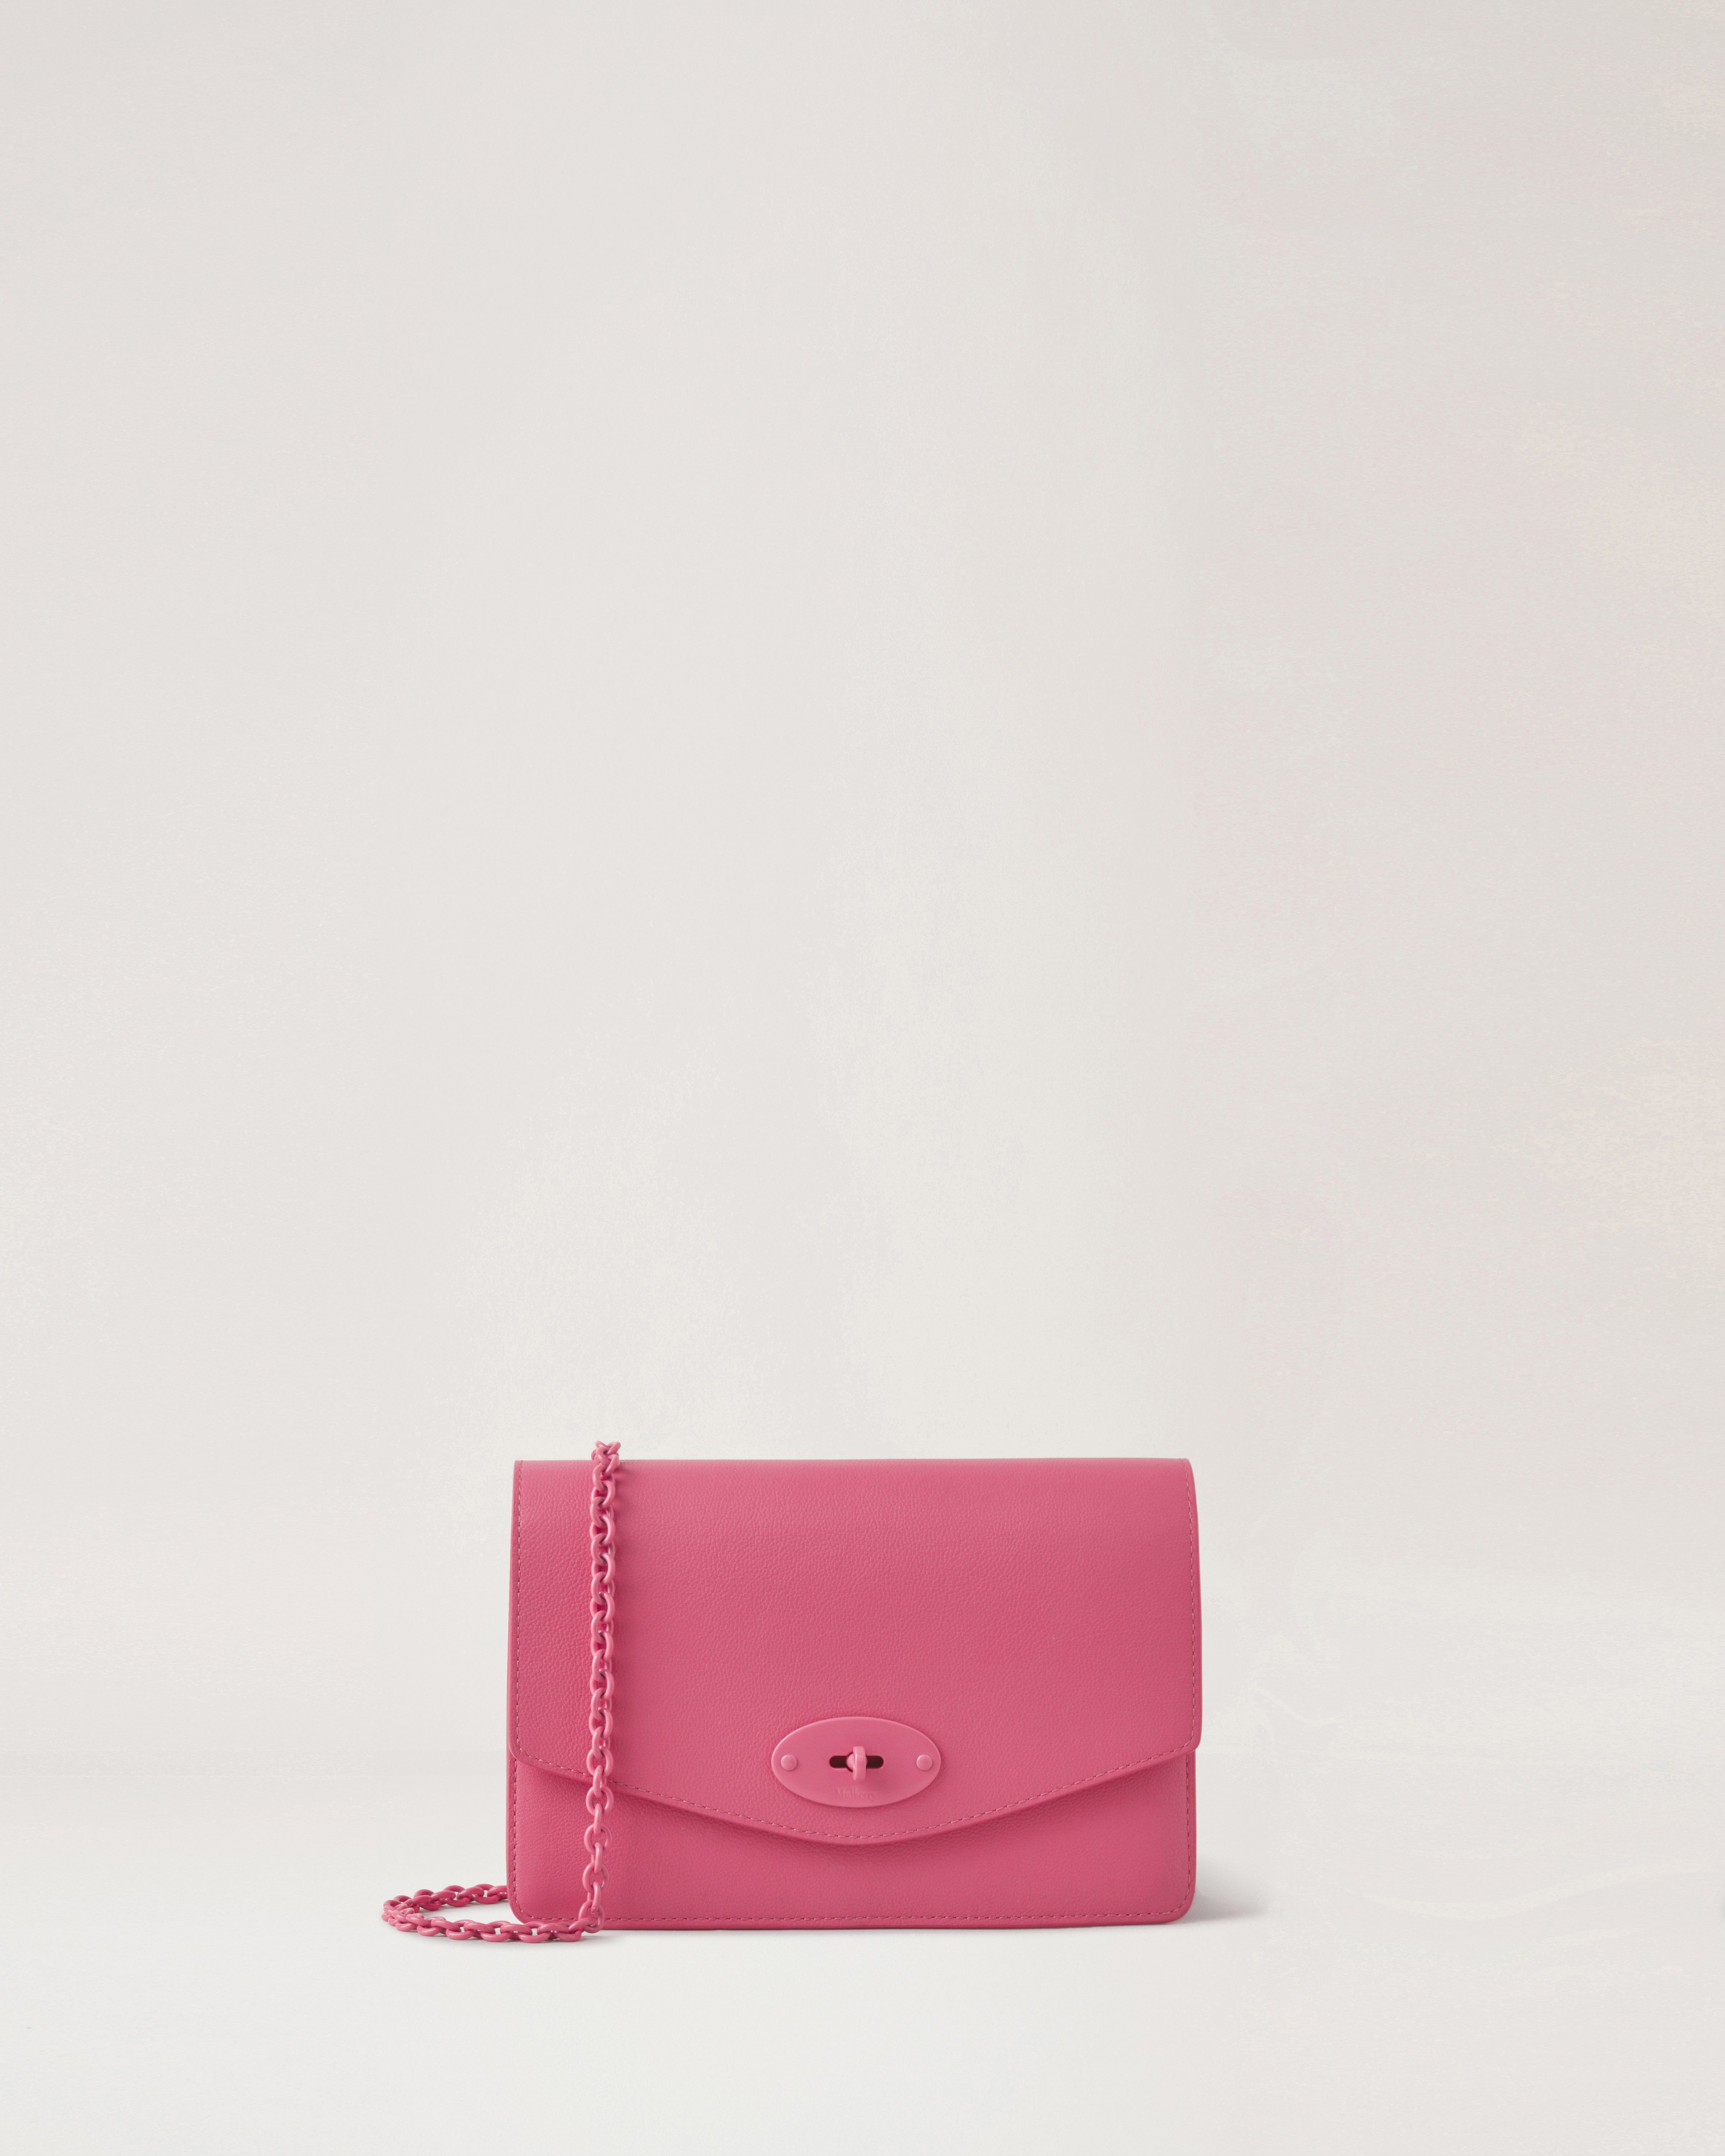 Mulberry Clutch Bags for Women for sale